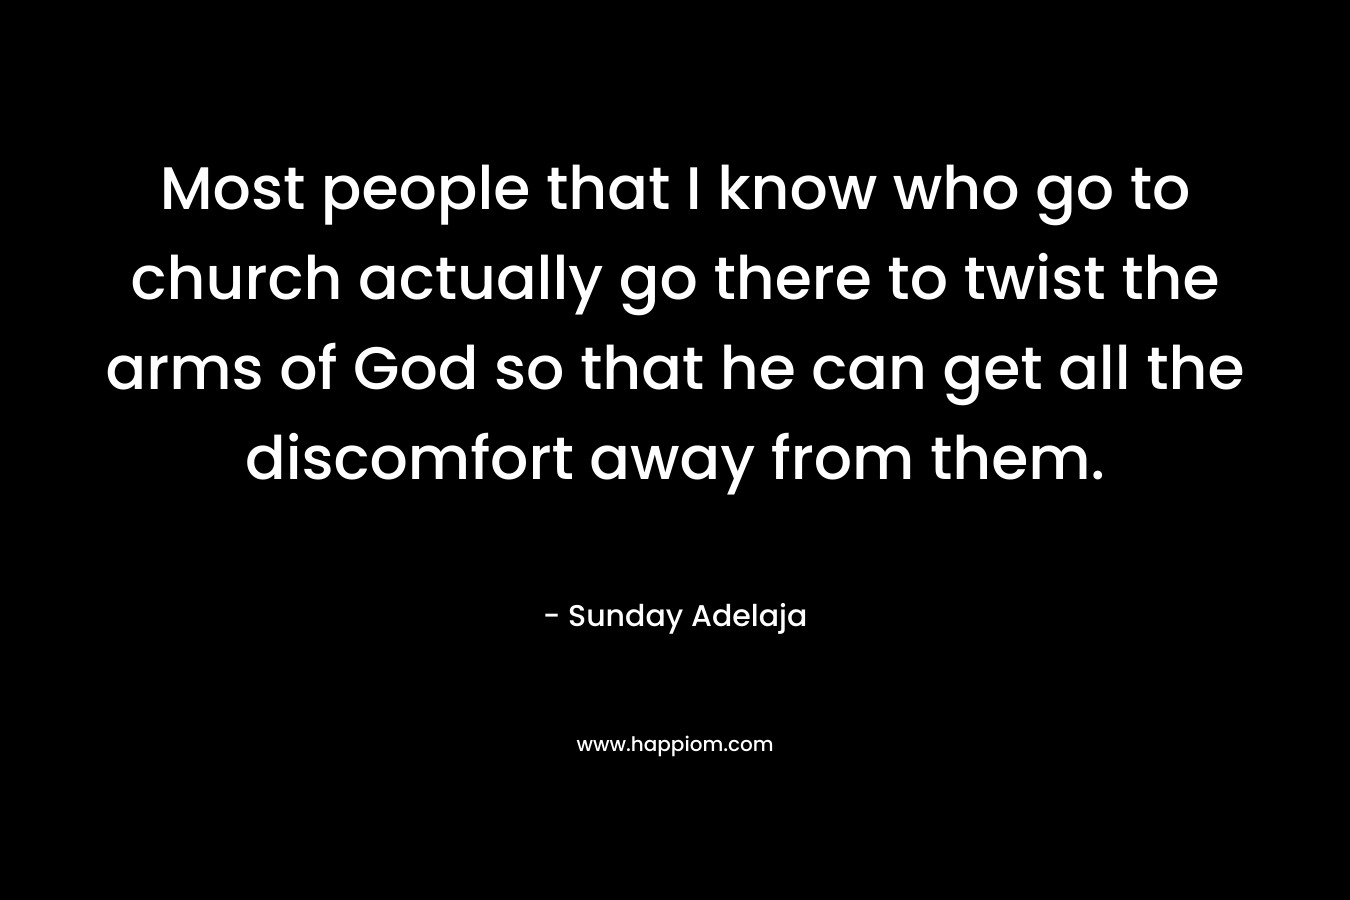 Most people that I know who go to church actually go there to twist the arms of God so that he can get all the discomfort away from them.